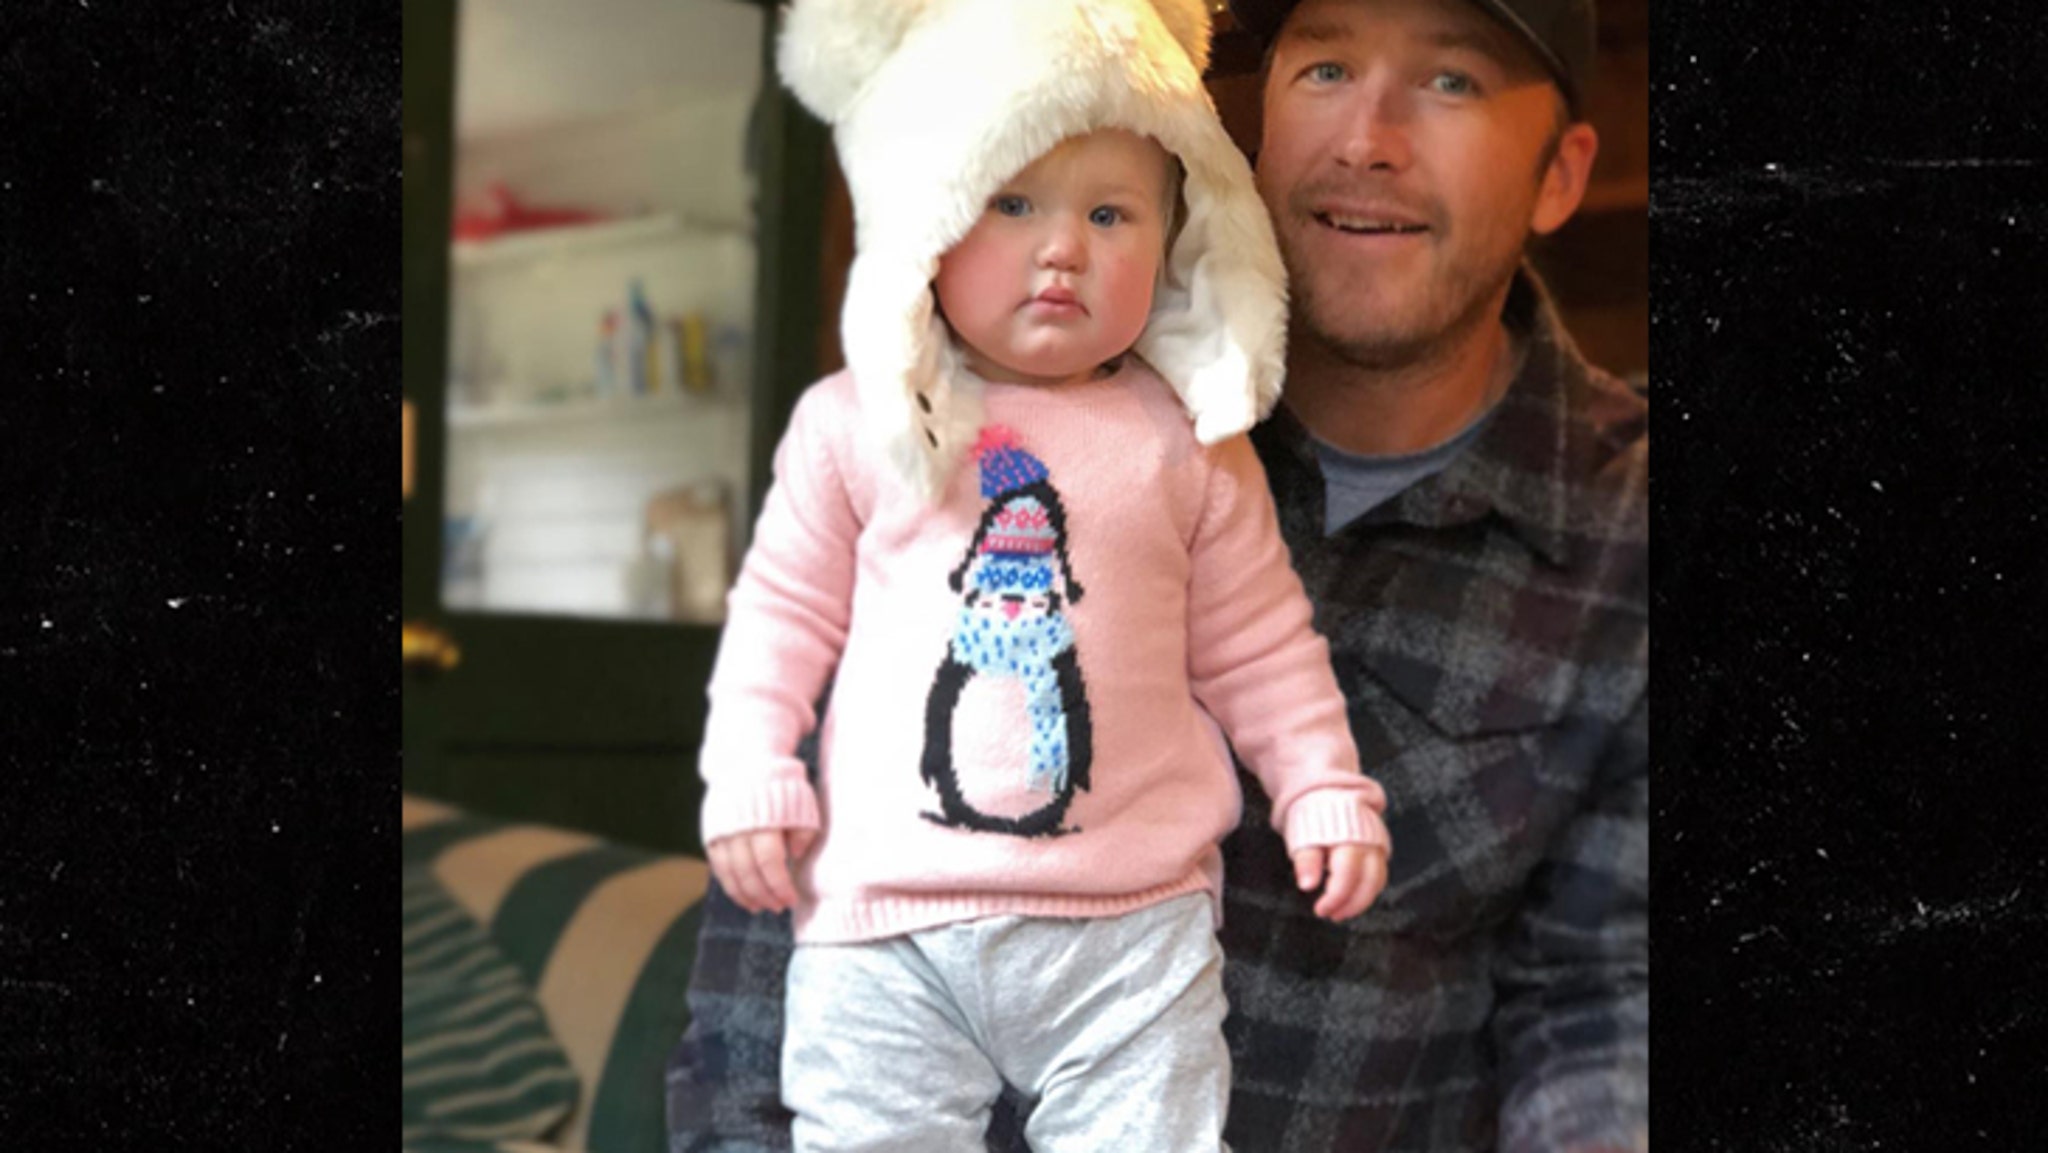 Olympic Skier Bode Miller's 19-Month-Old Daughter Dies After Pool Accident